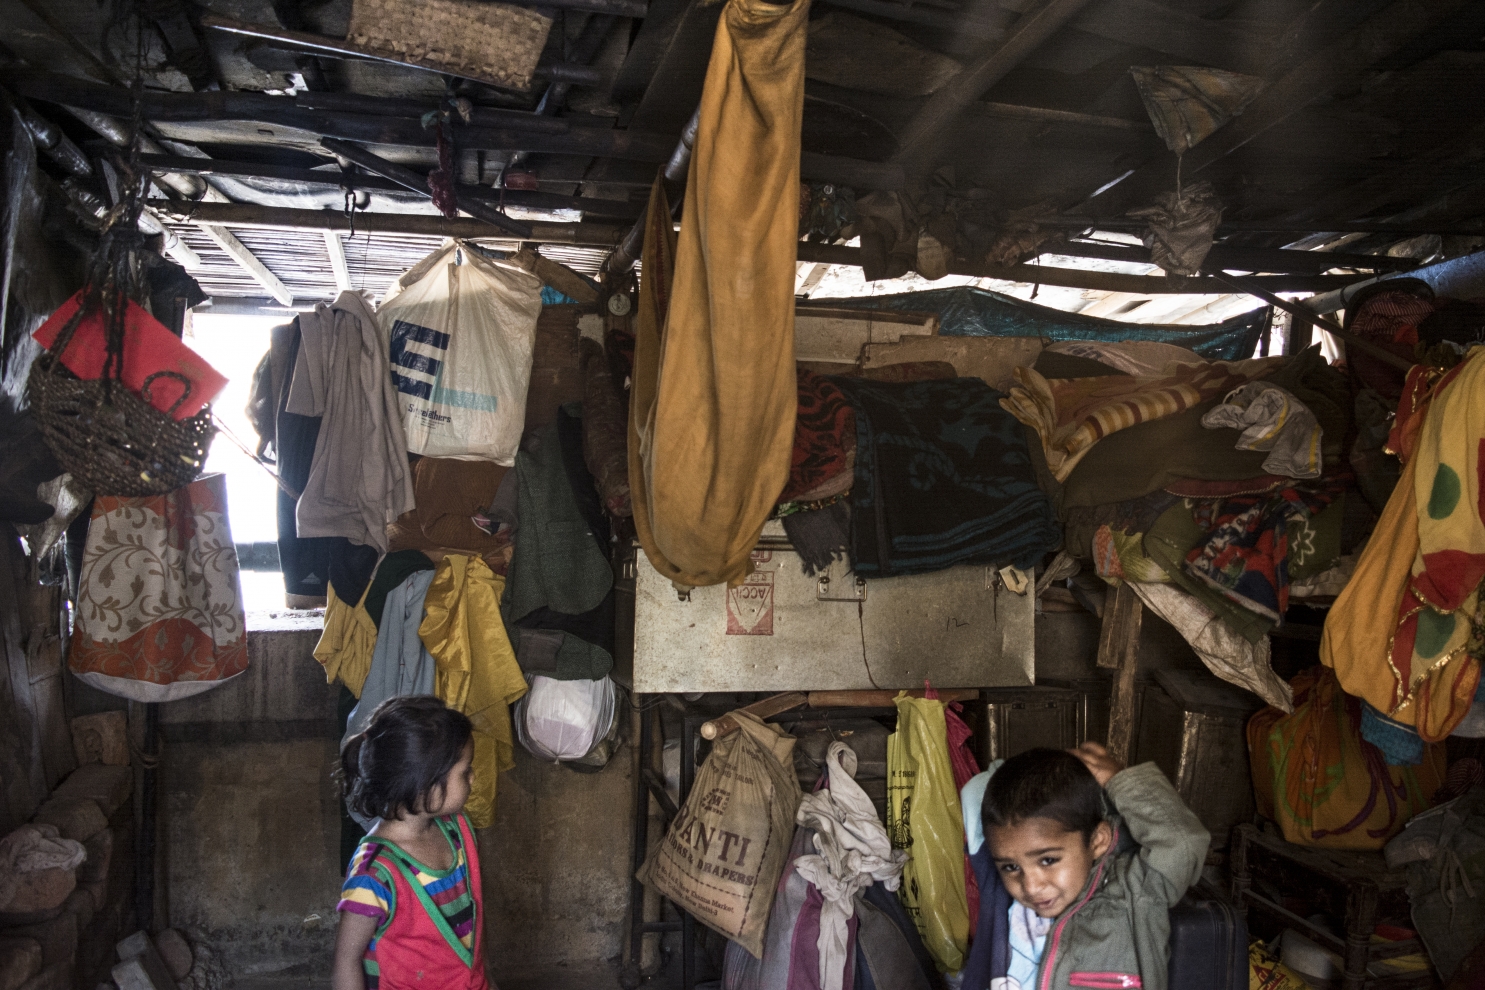 The living conditions in these settlements are tough. Usually, a family of 6-7 people lives in a single room.